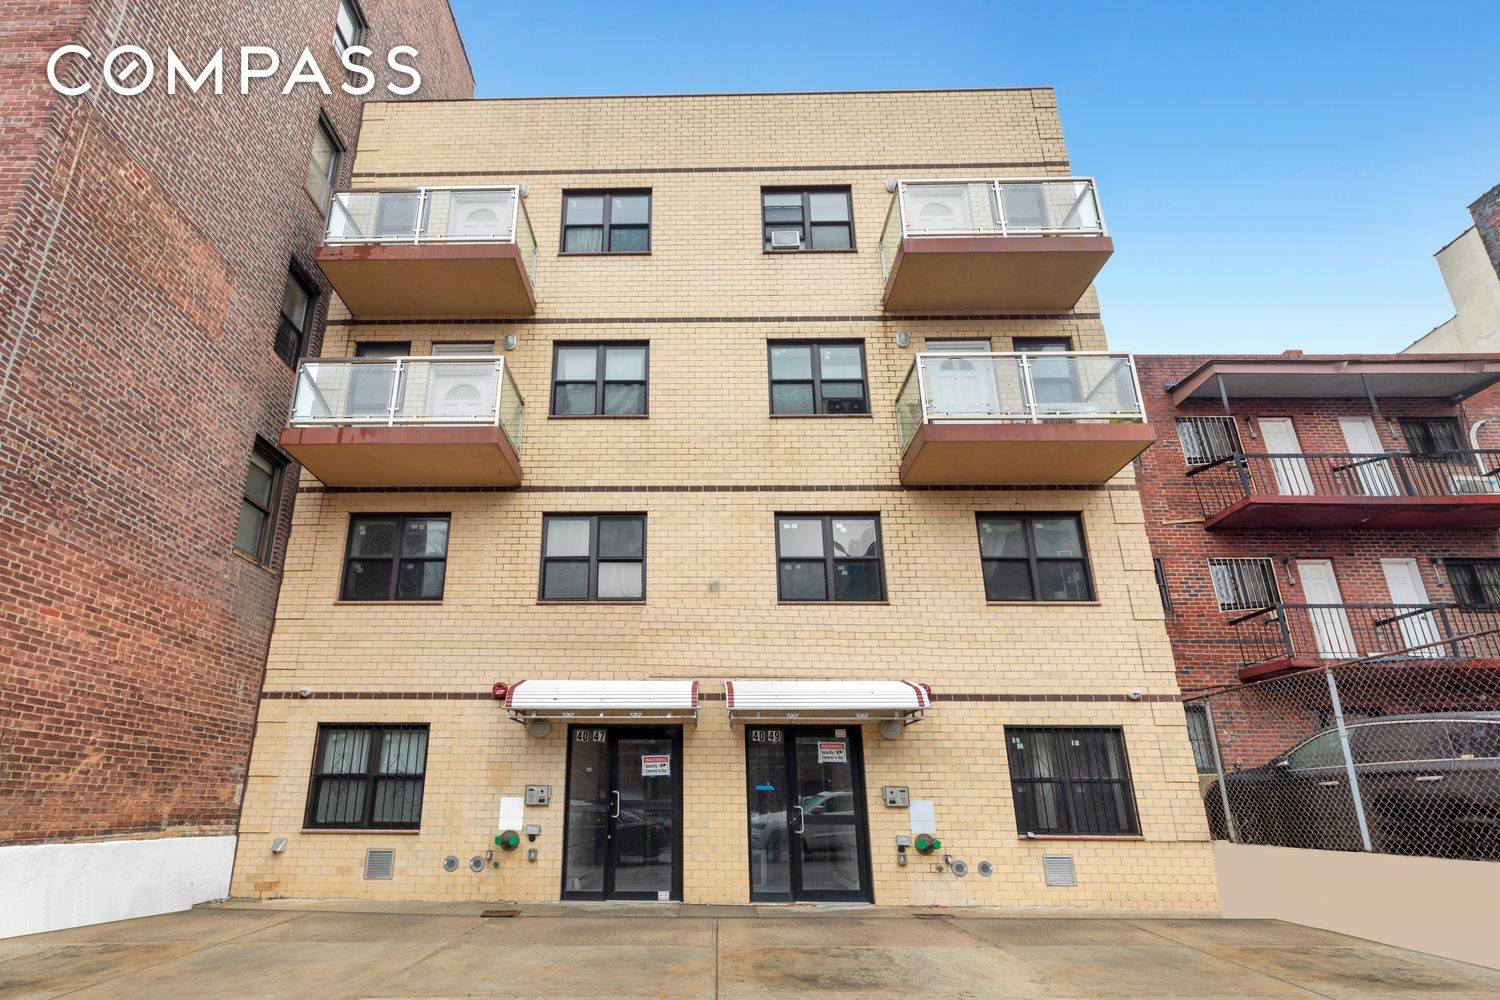 This listing is pertaining to the sale of both 40 47 77 Street and 40 49 77 Street located in Elmhurst, Queens.